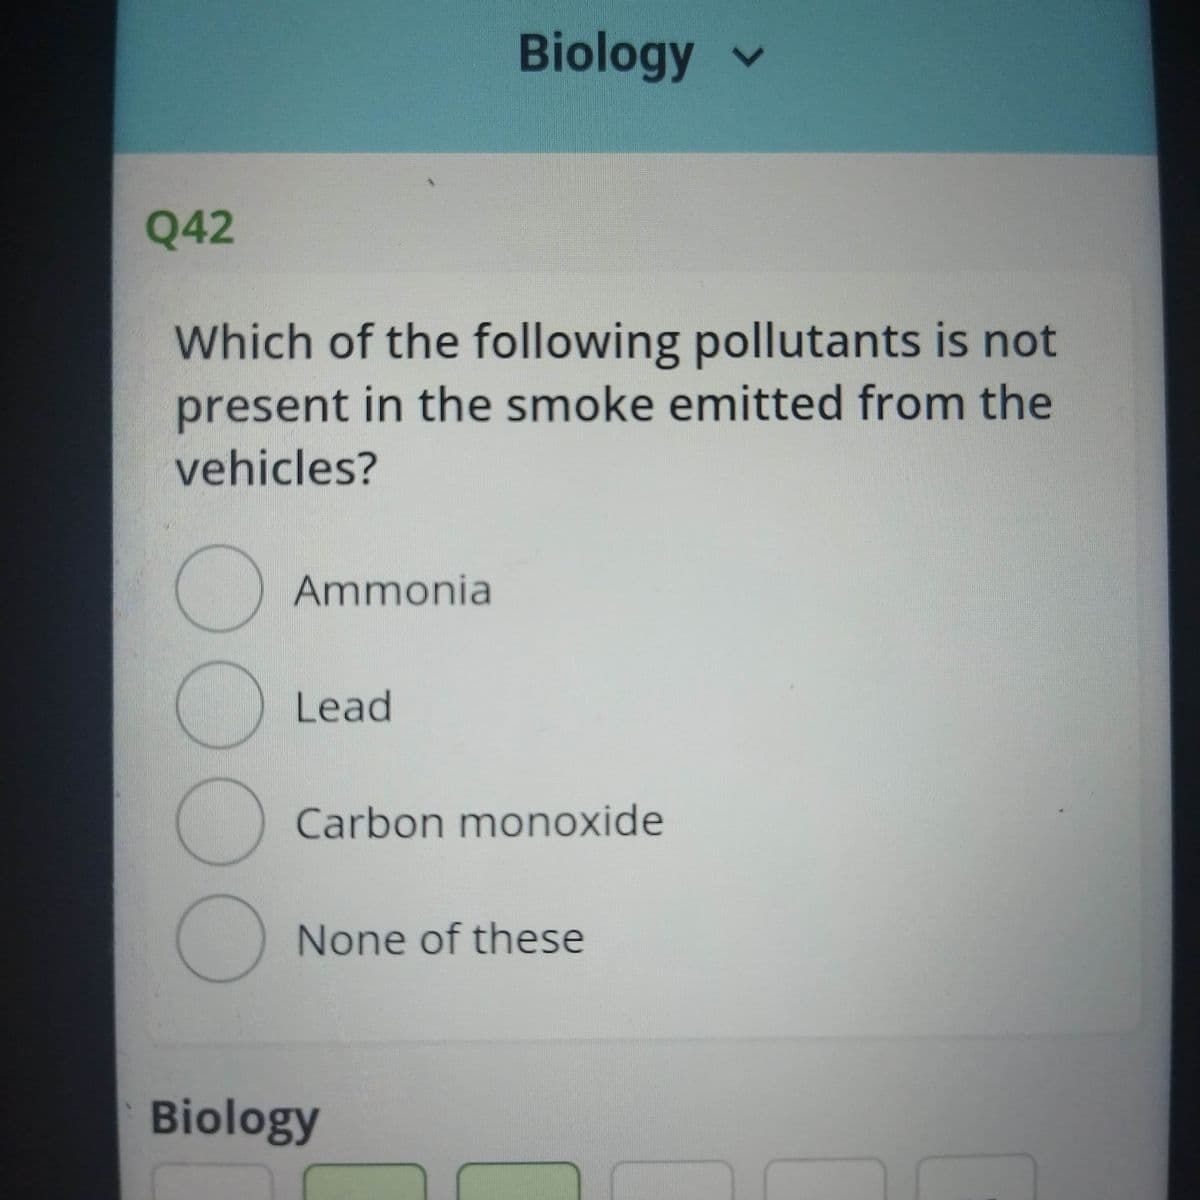 Biology v
Q42
Which of the following pollutants is not
present in the smoke emitted from the
vehicles?
Ammonia
Lead
) Carbon monoxide
None of these
Biology
